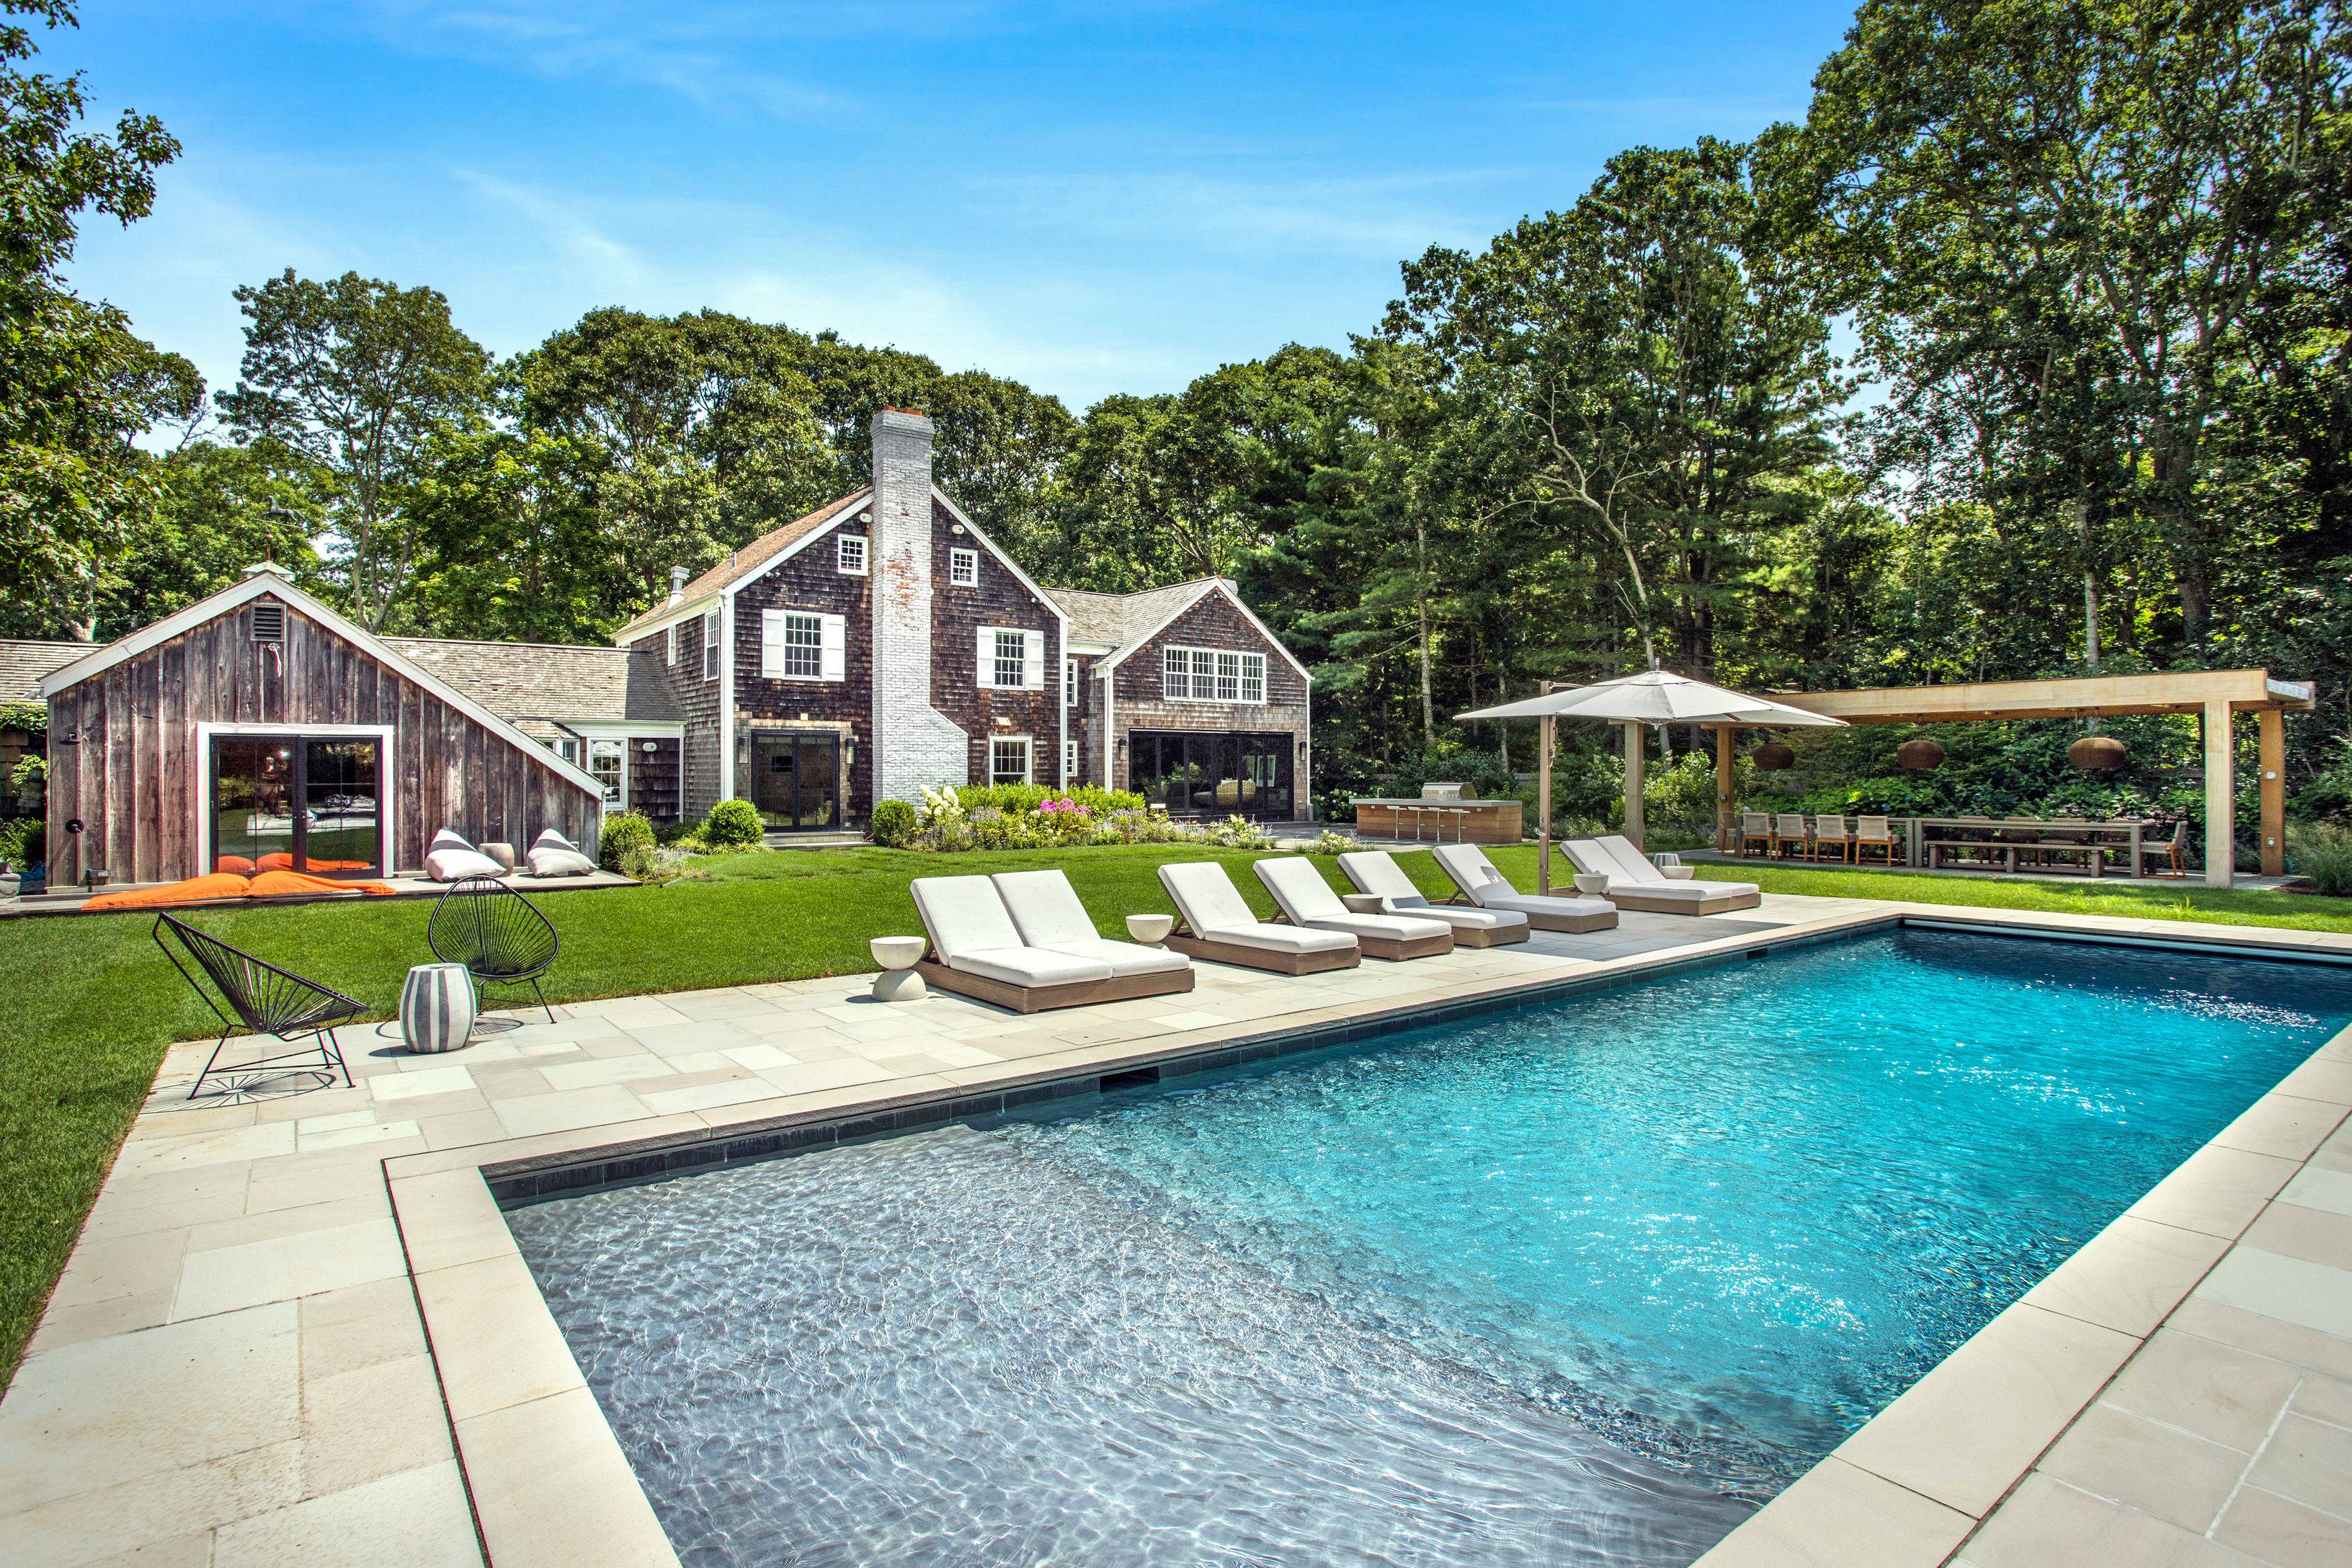 Traditional Architecture Meets Ultimate Design in Wainscott